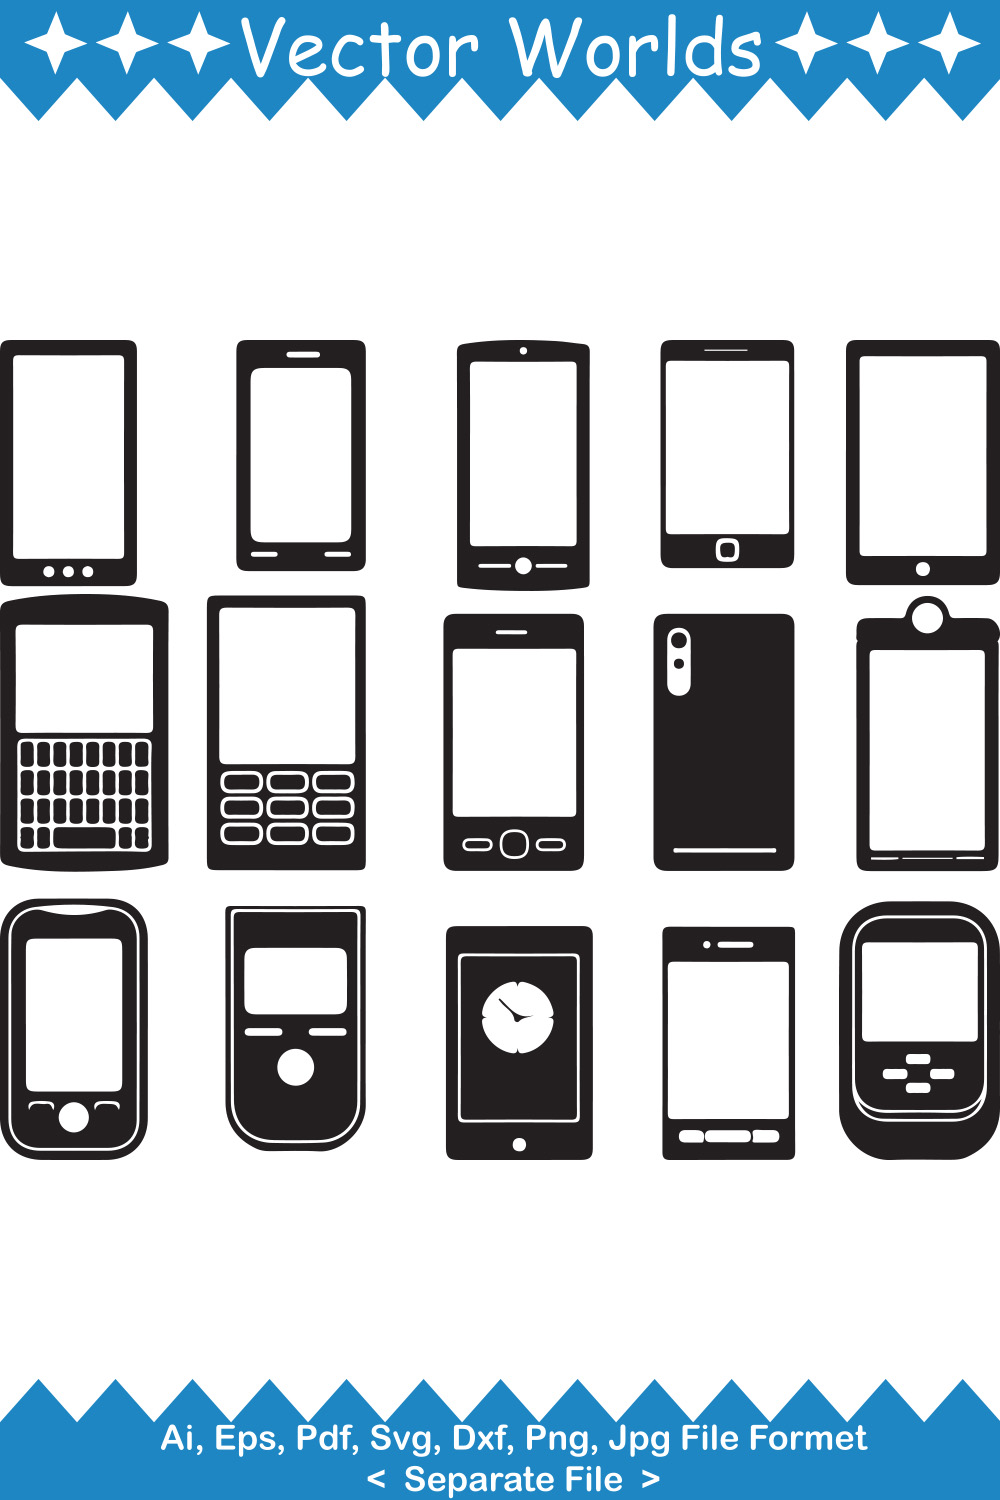 Set of charming vector image of a cell phone.